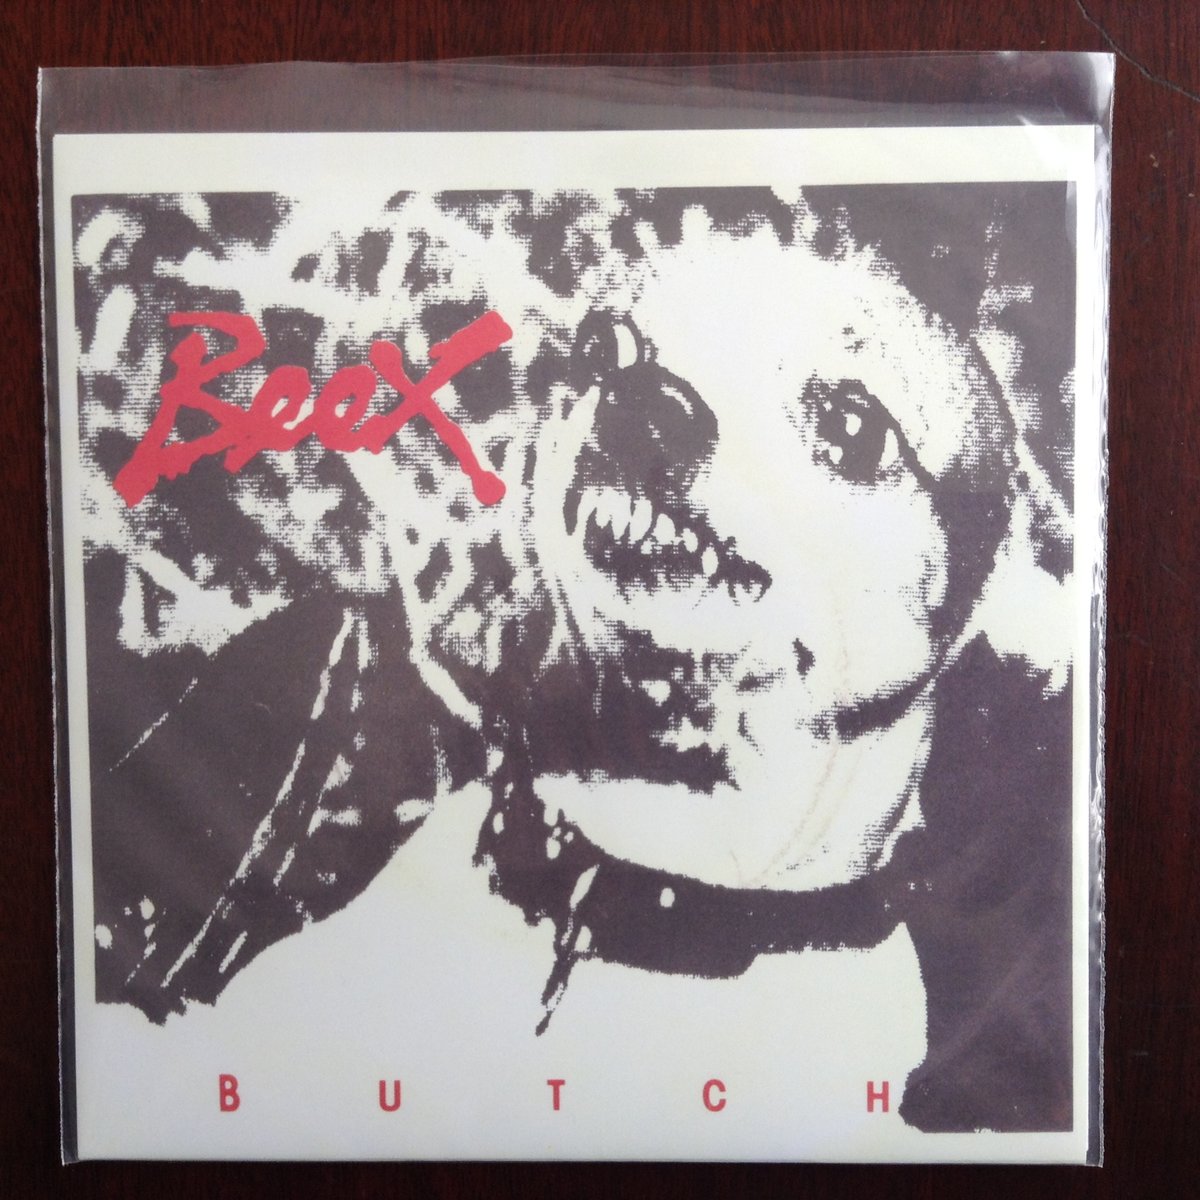 Image of Butch/Empty House 7" 45 record 1981 (reprinted cover)